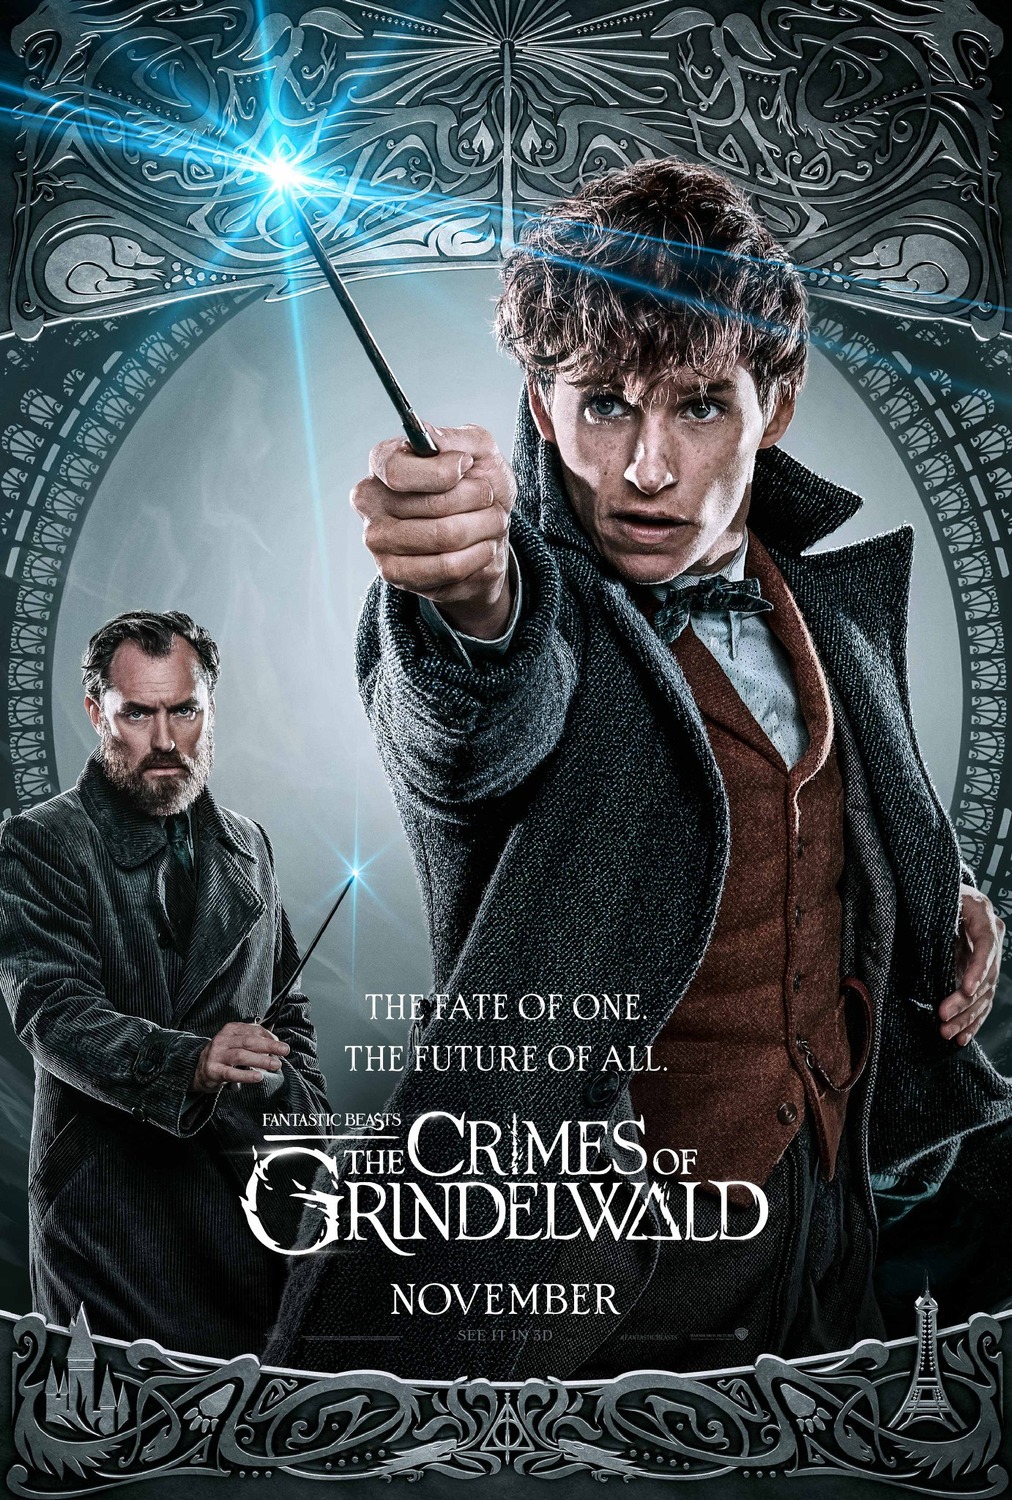 Extra Large Movie Poster Image for Fantastic Beasts: The Crimes of Grindelwald (#15 of 32)